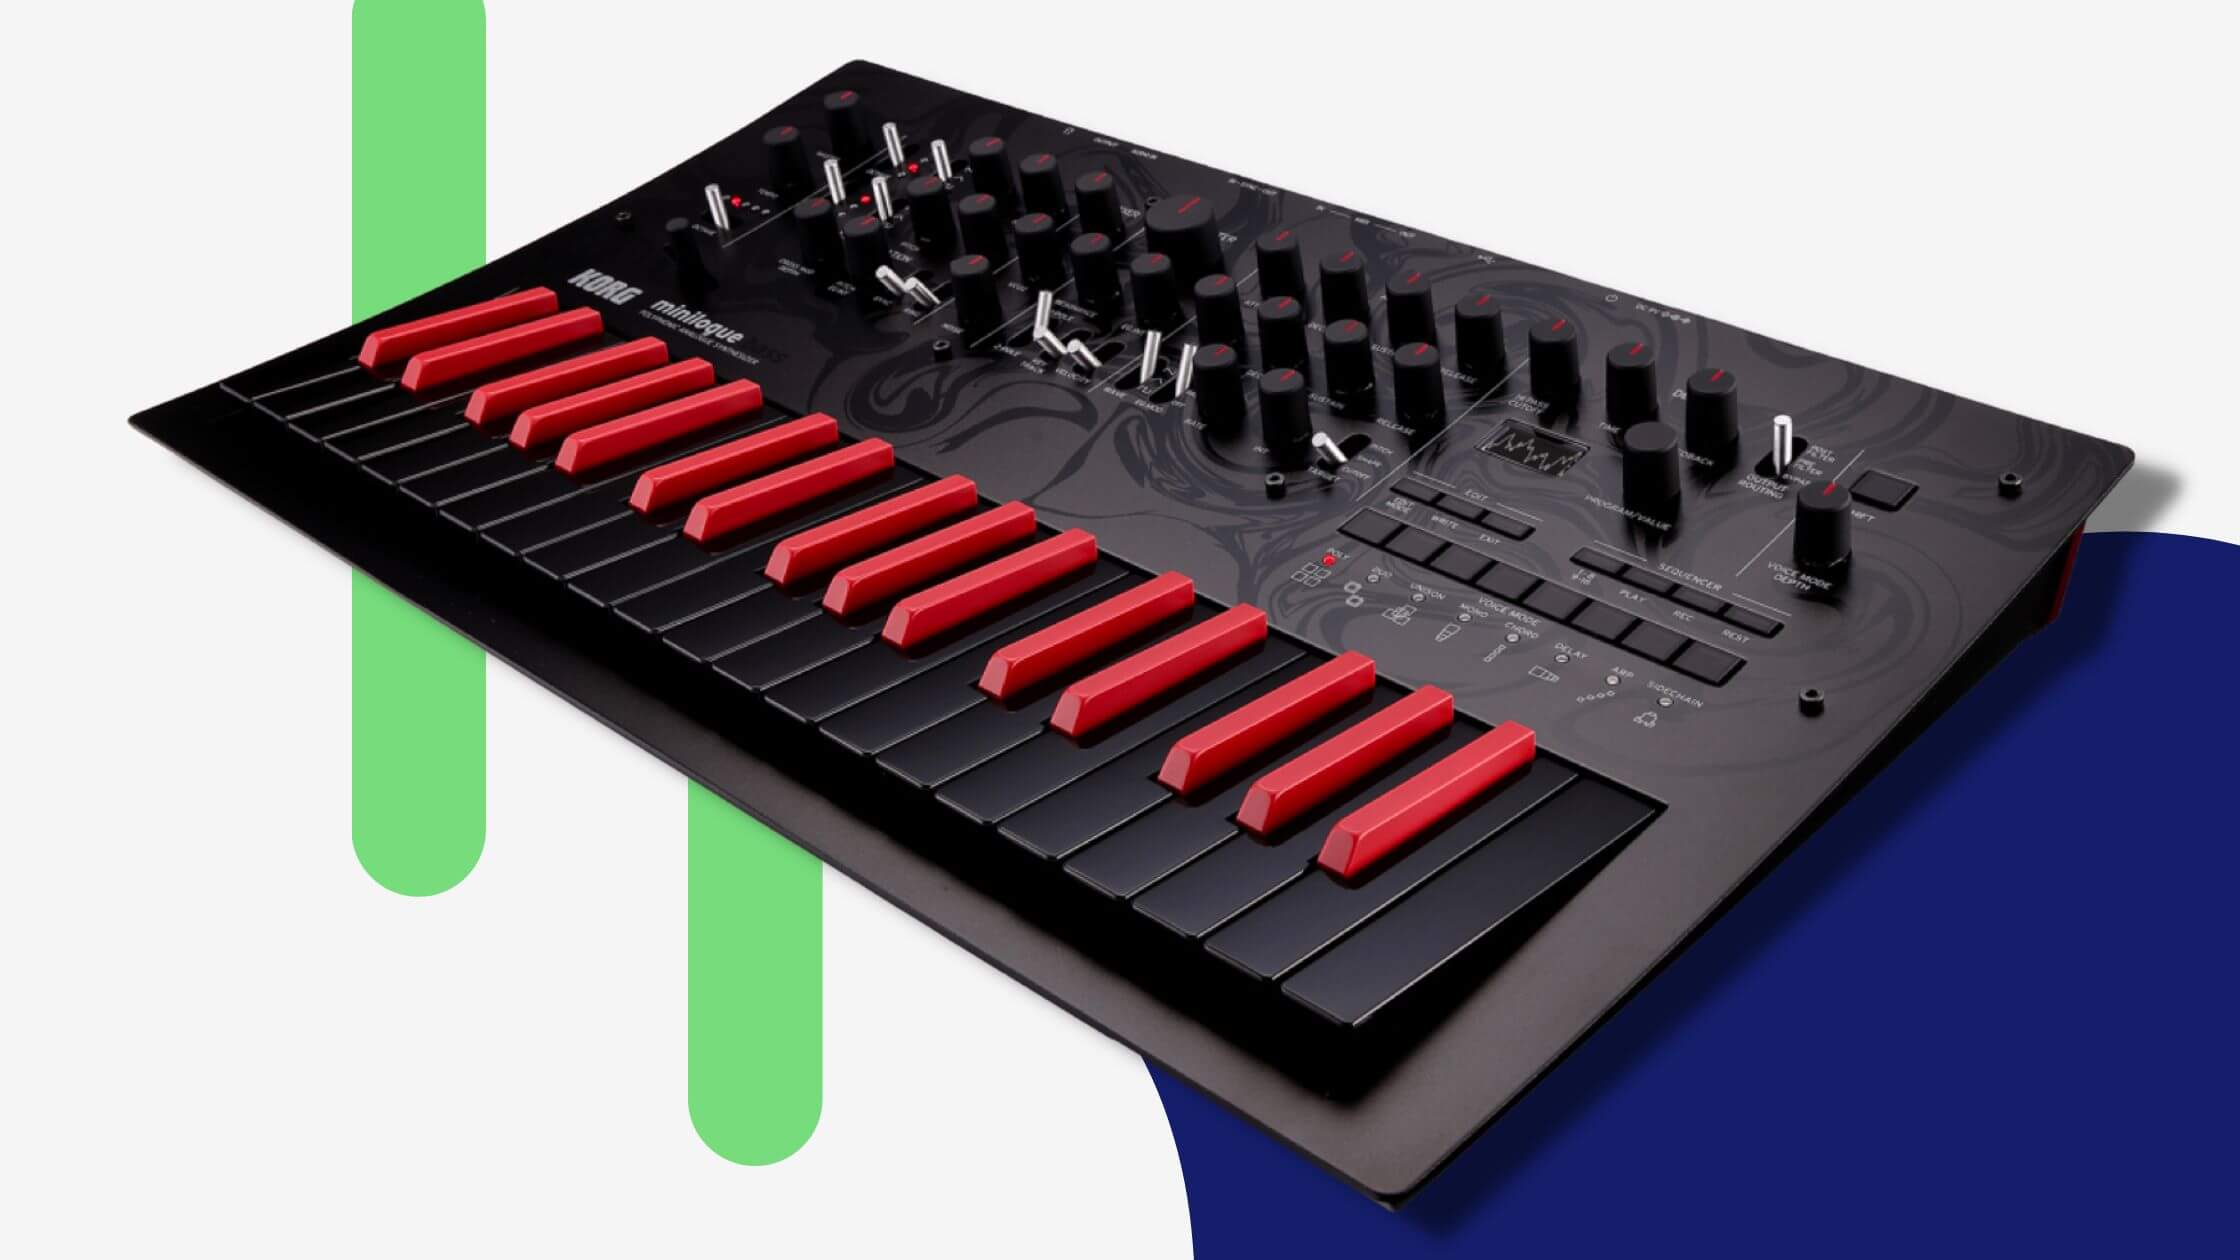 Korg Minilogue Bass is a limited edition Minilogue synth with a new sound bank and look